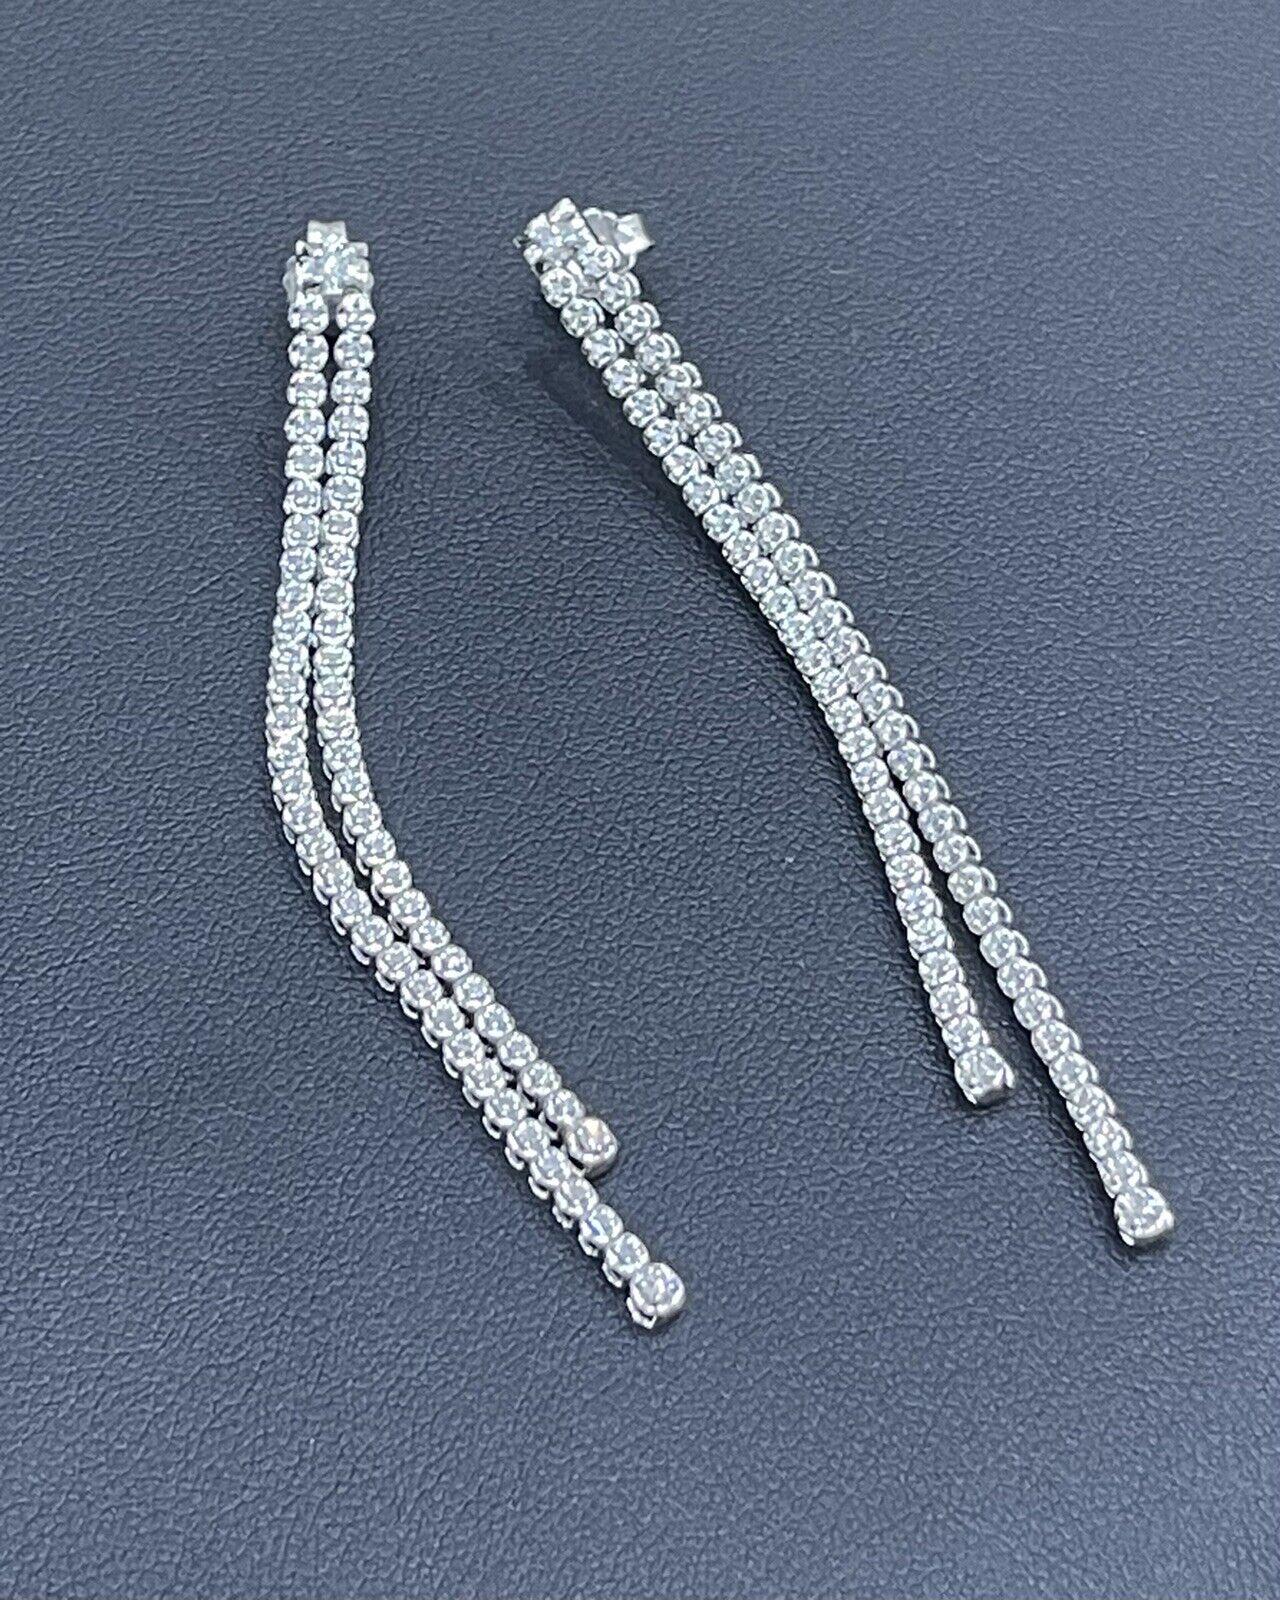 18ct Solid White Gold Diamond Earrings 0.50ct Long Tennis Drop Cocktail Studs For Sale 1